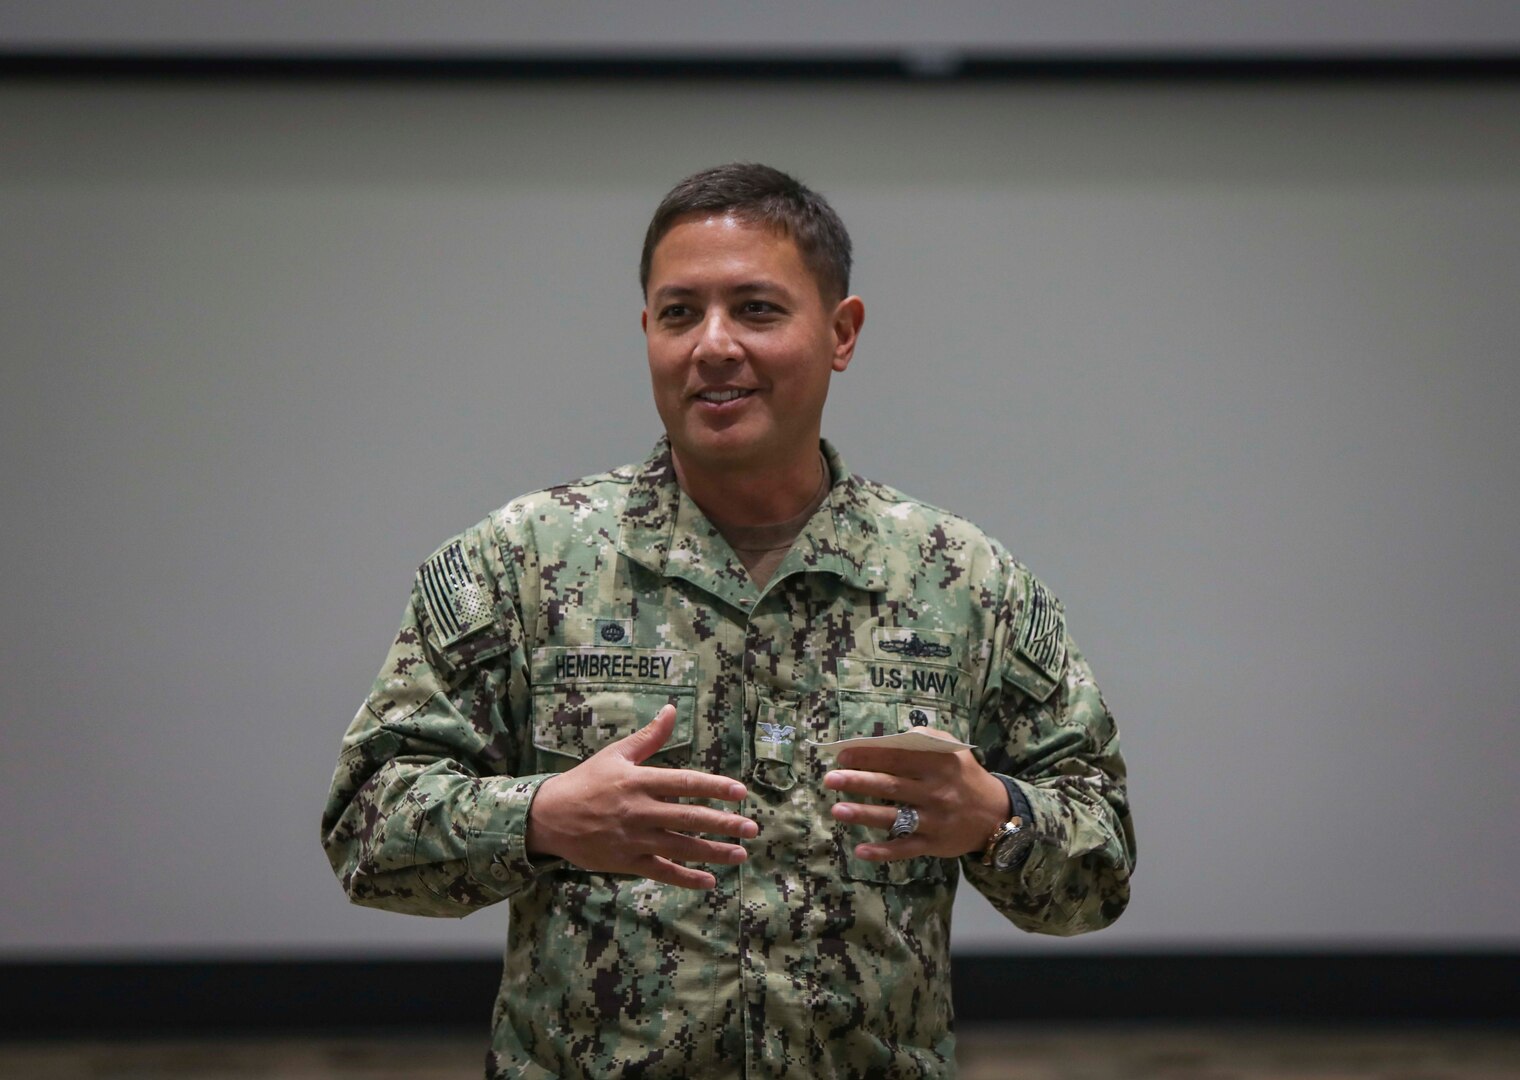 Capt. Khary W. Hembree-Bey, commanding officer of Naval Surface Warfare Center (NSWC) Corona, addresses employees during his monthly town hall meeting.